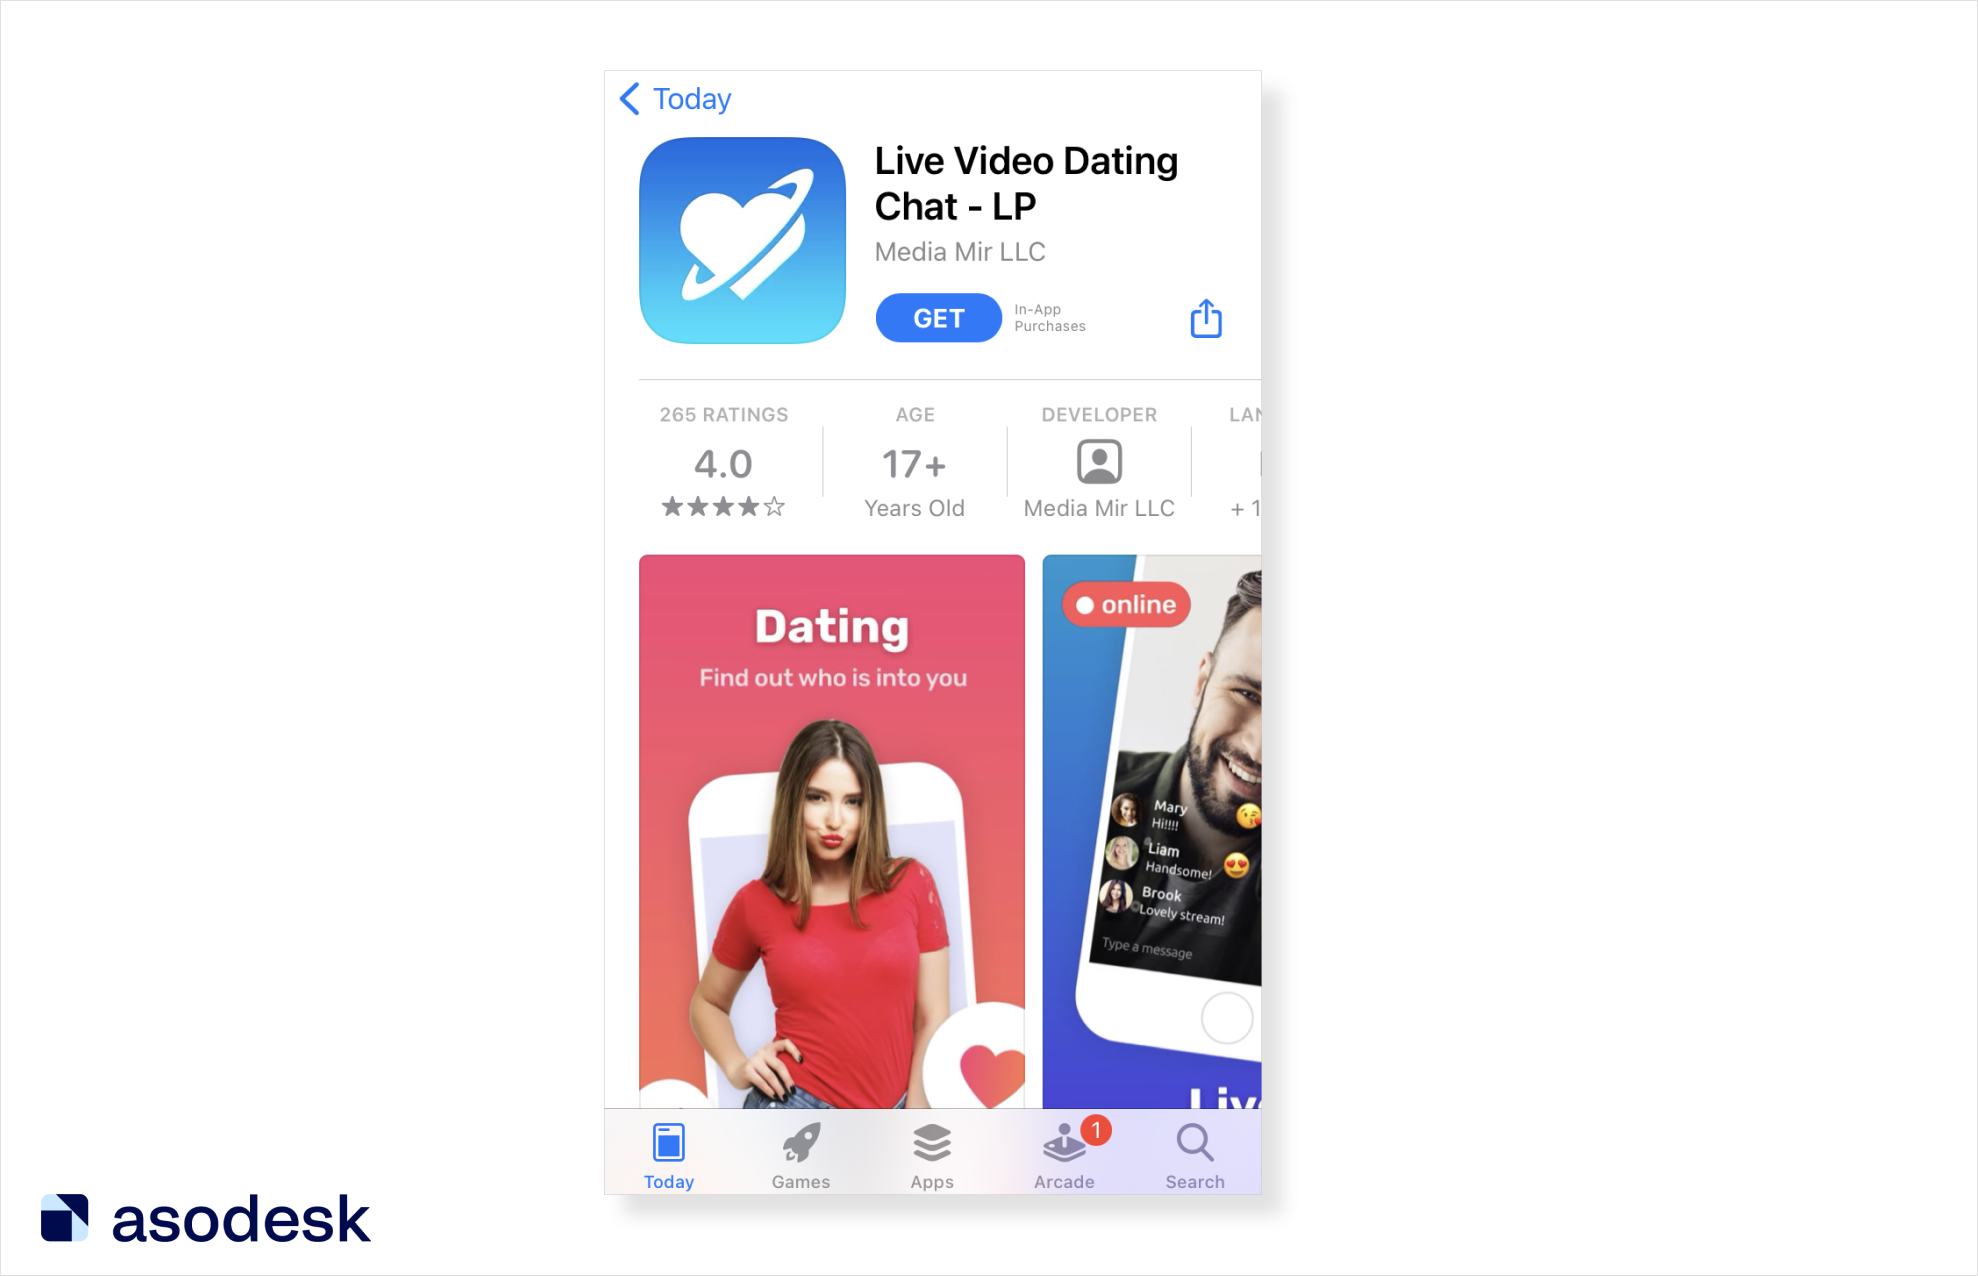 The combination of requests in the title and in the screenshots of the Live Video Dating app